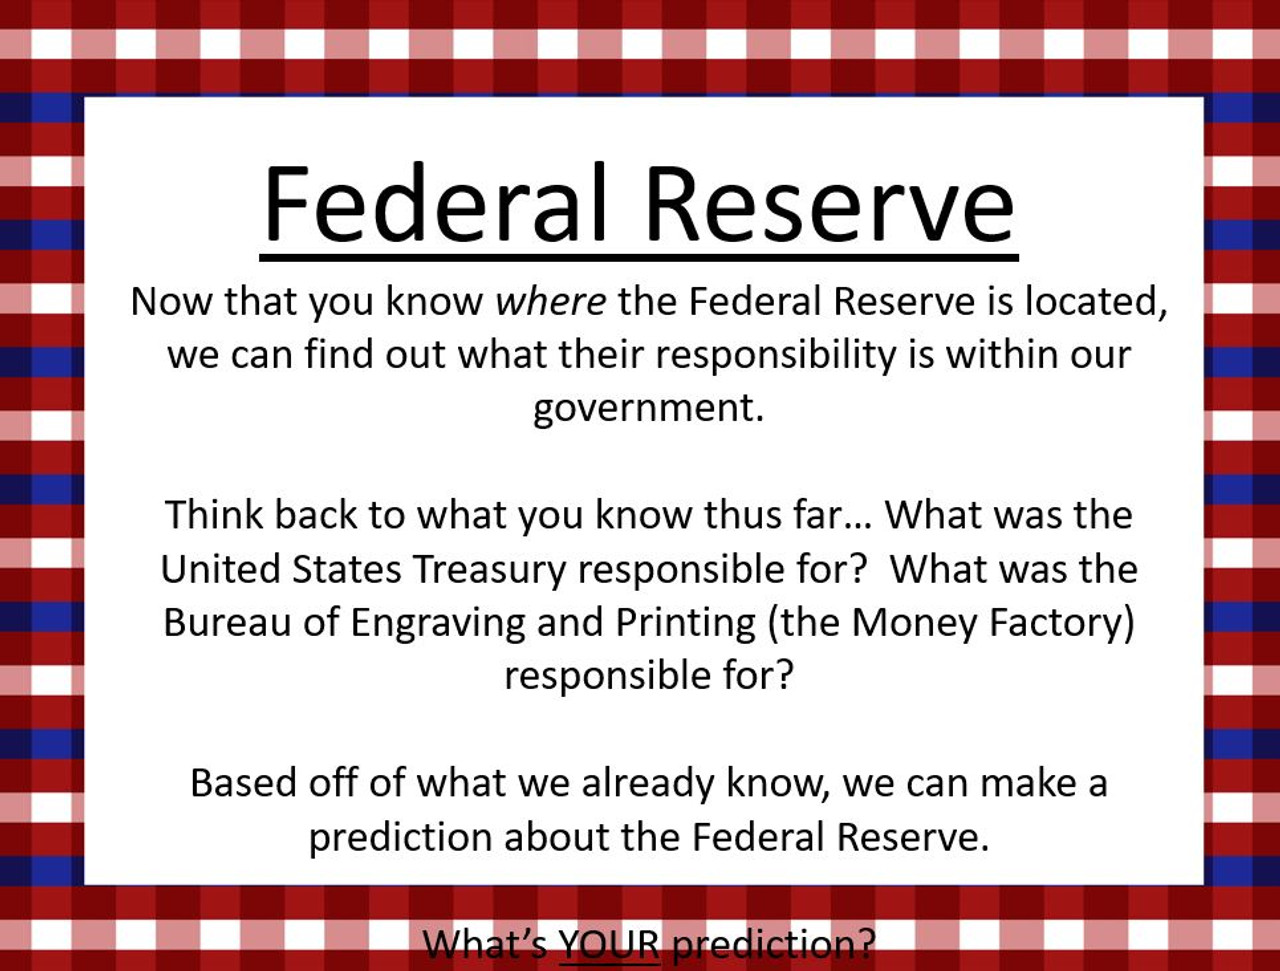 The United States Government: The Treasury, Federal Reserve, & Money Factory